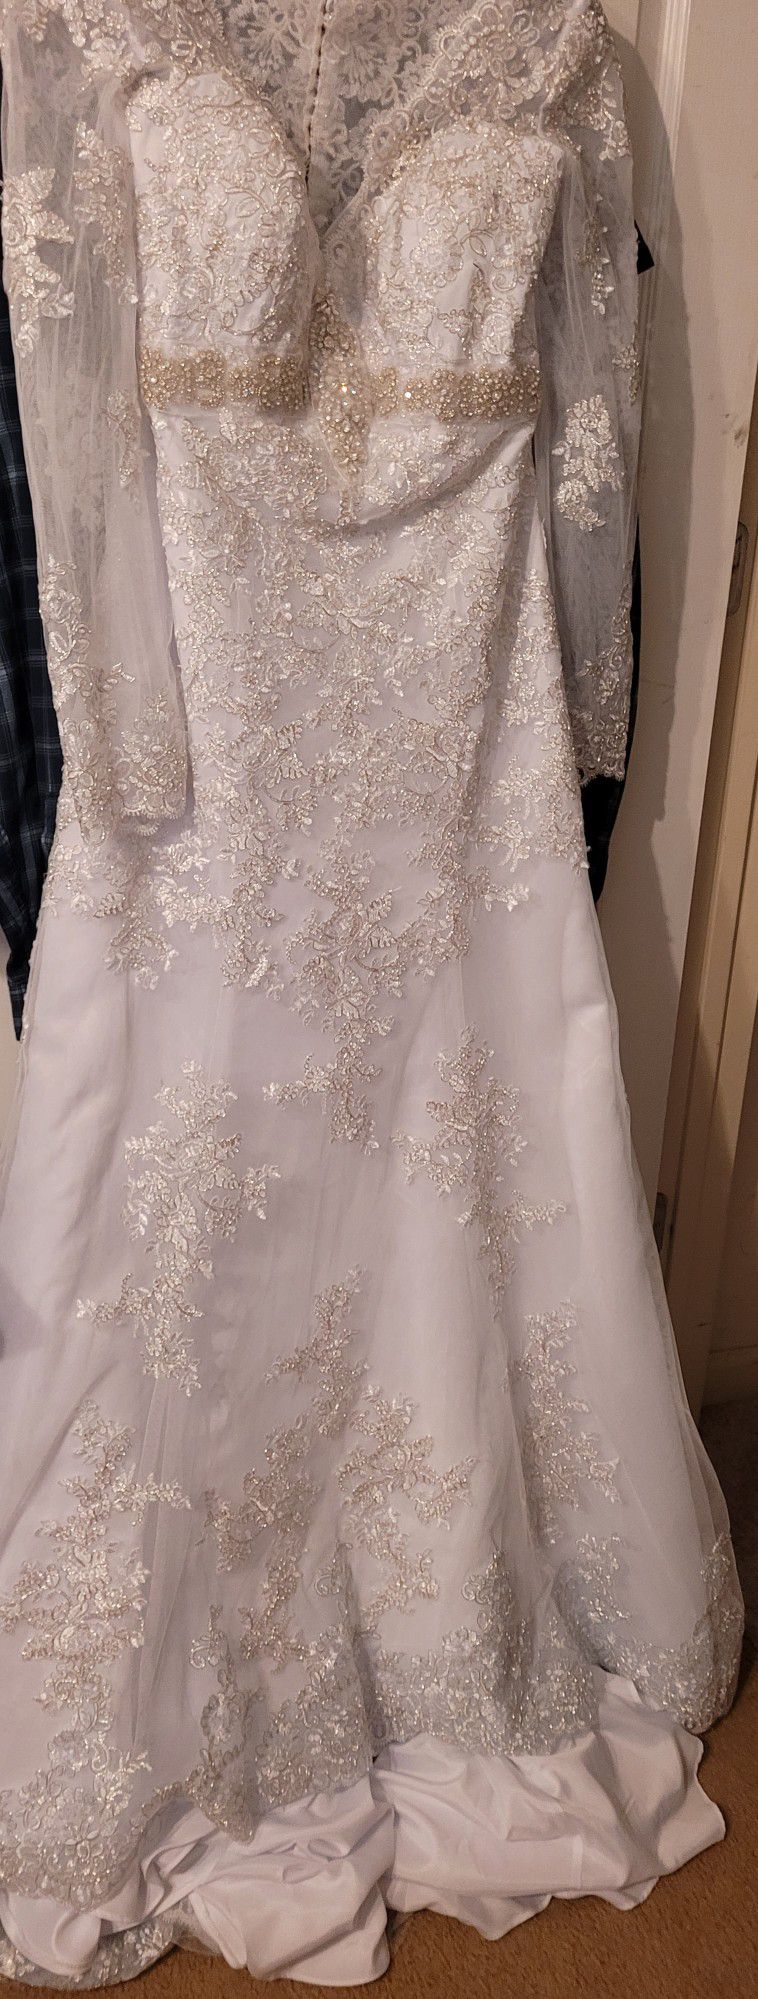 Wedding Dress, White,  For Anyone Who Wants to Buy This Dress. I Will Give You The White Boots For Free.